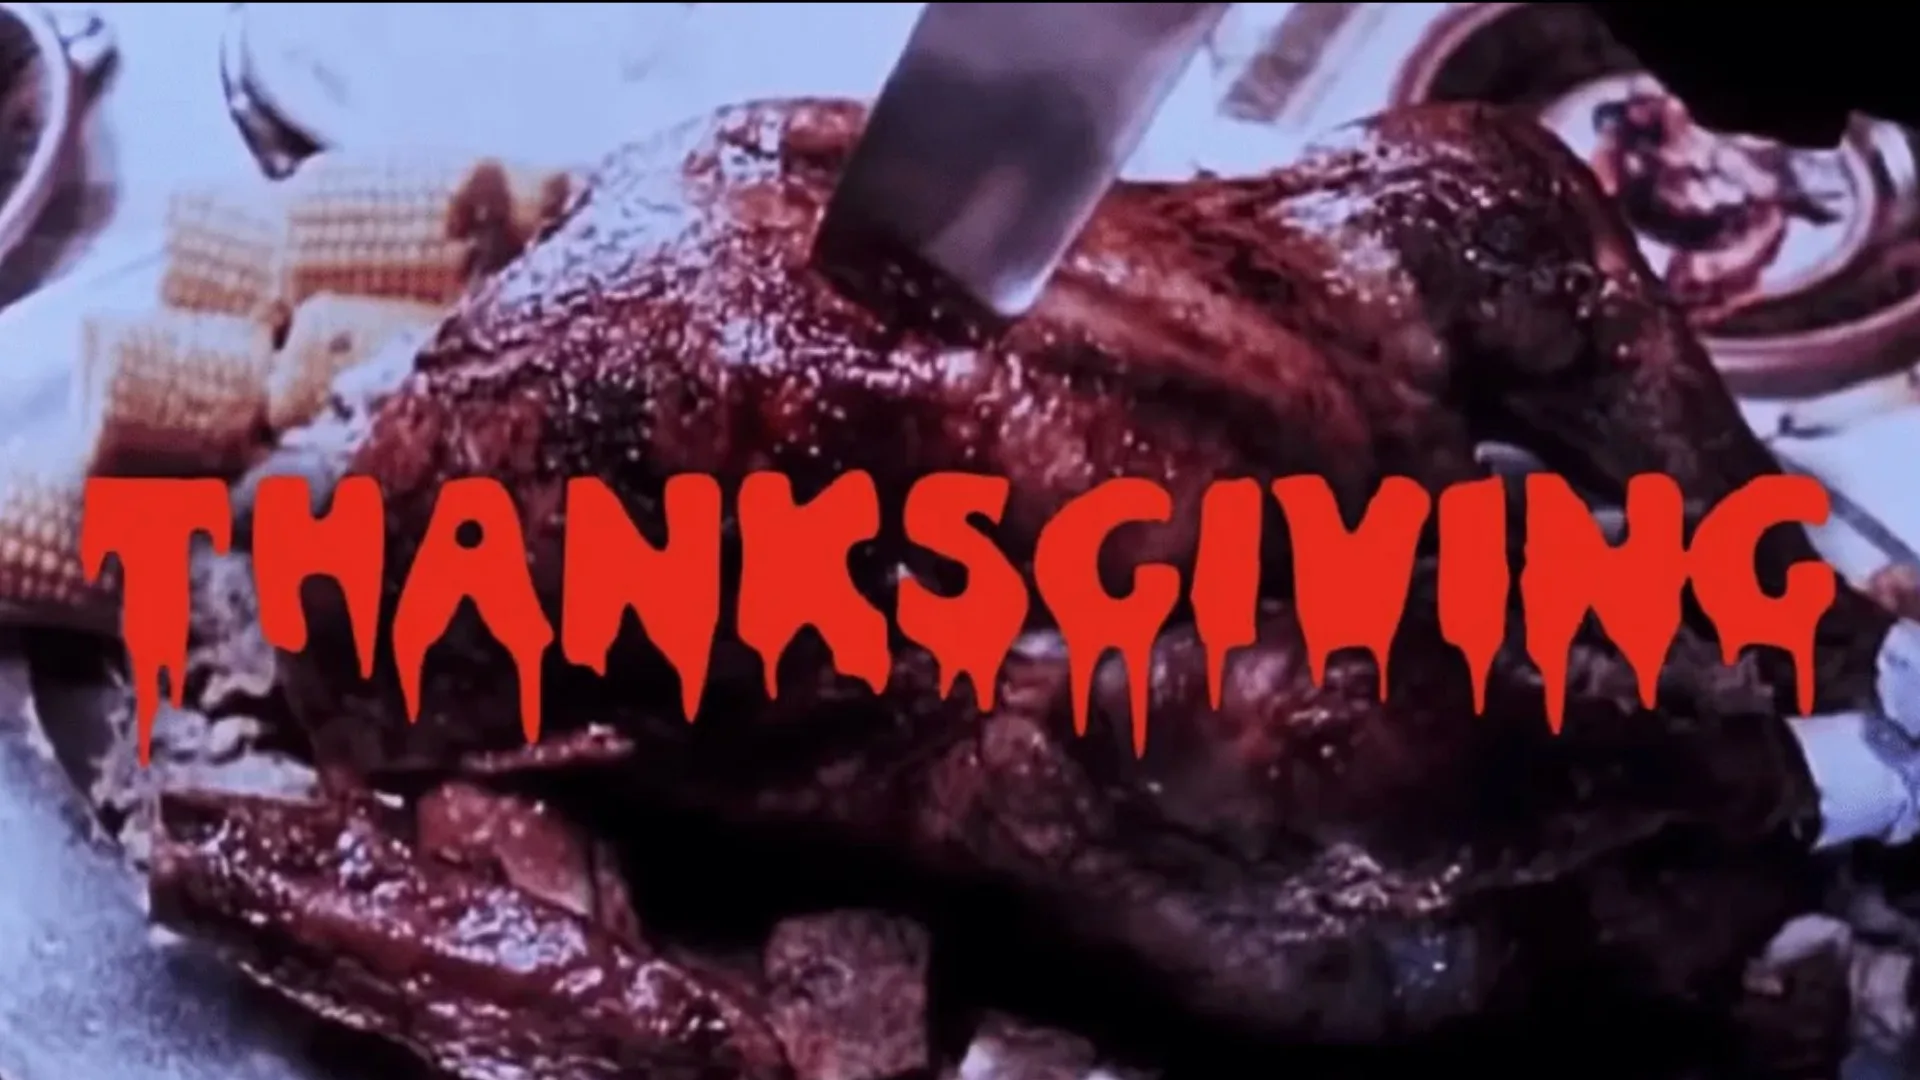 thanksgiviong grindhouse